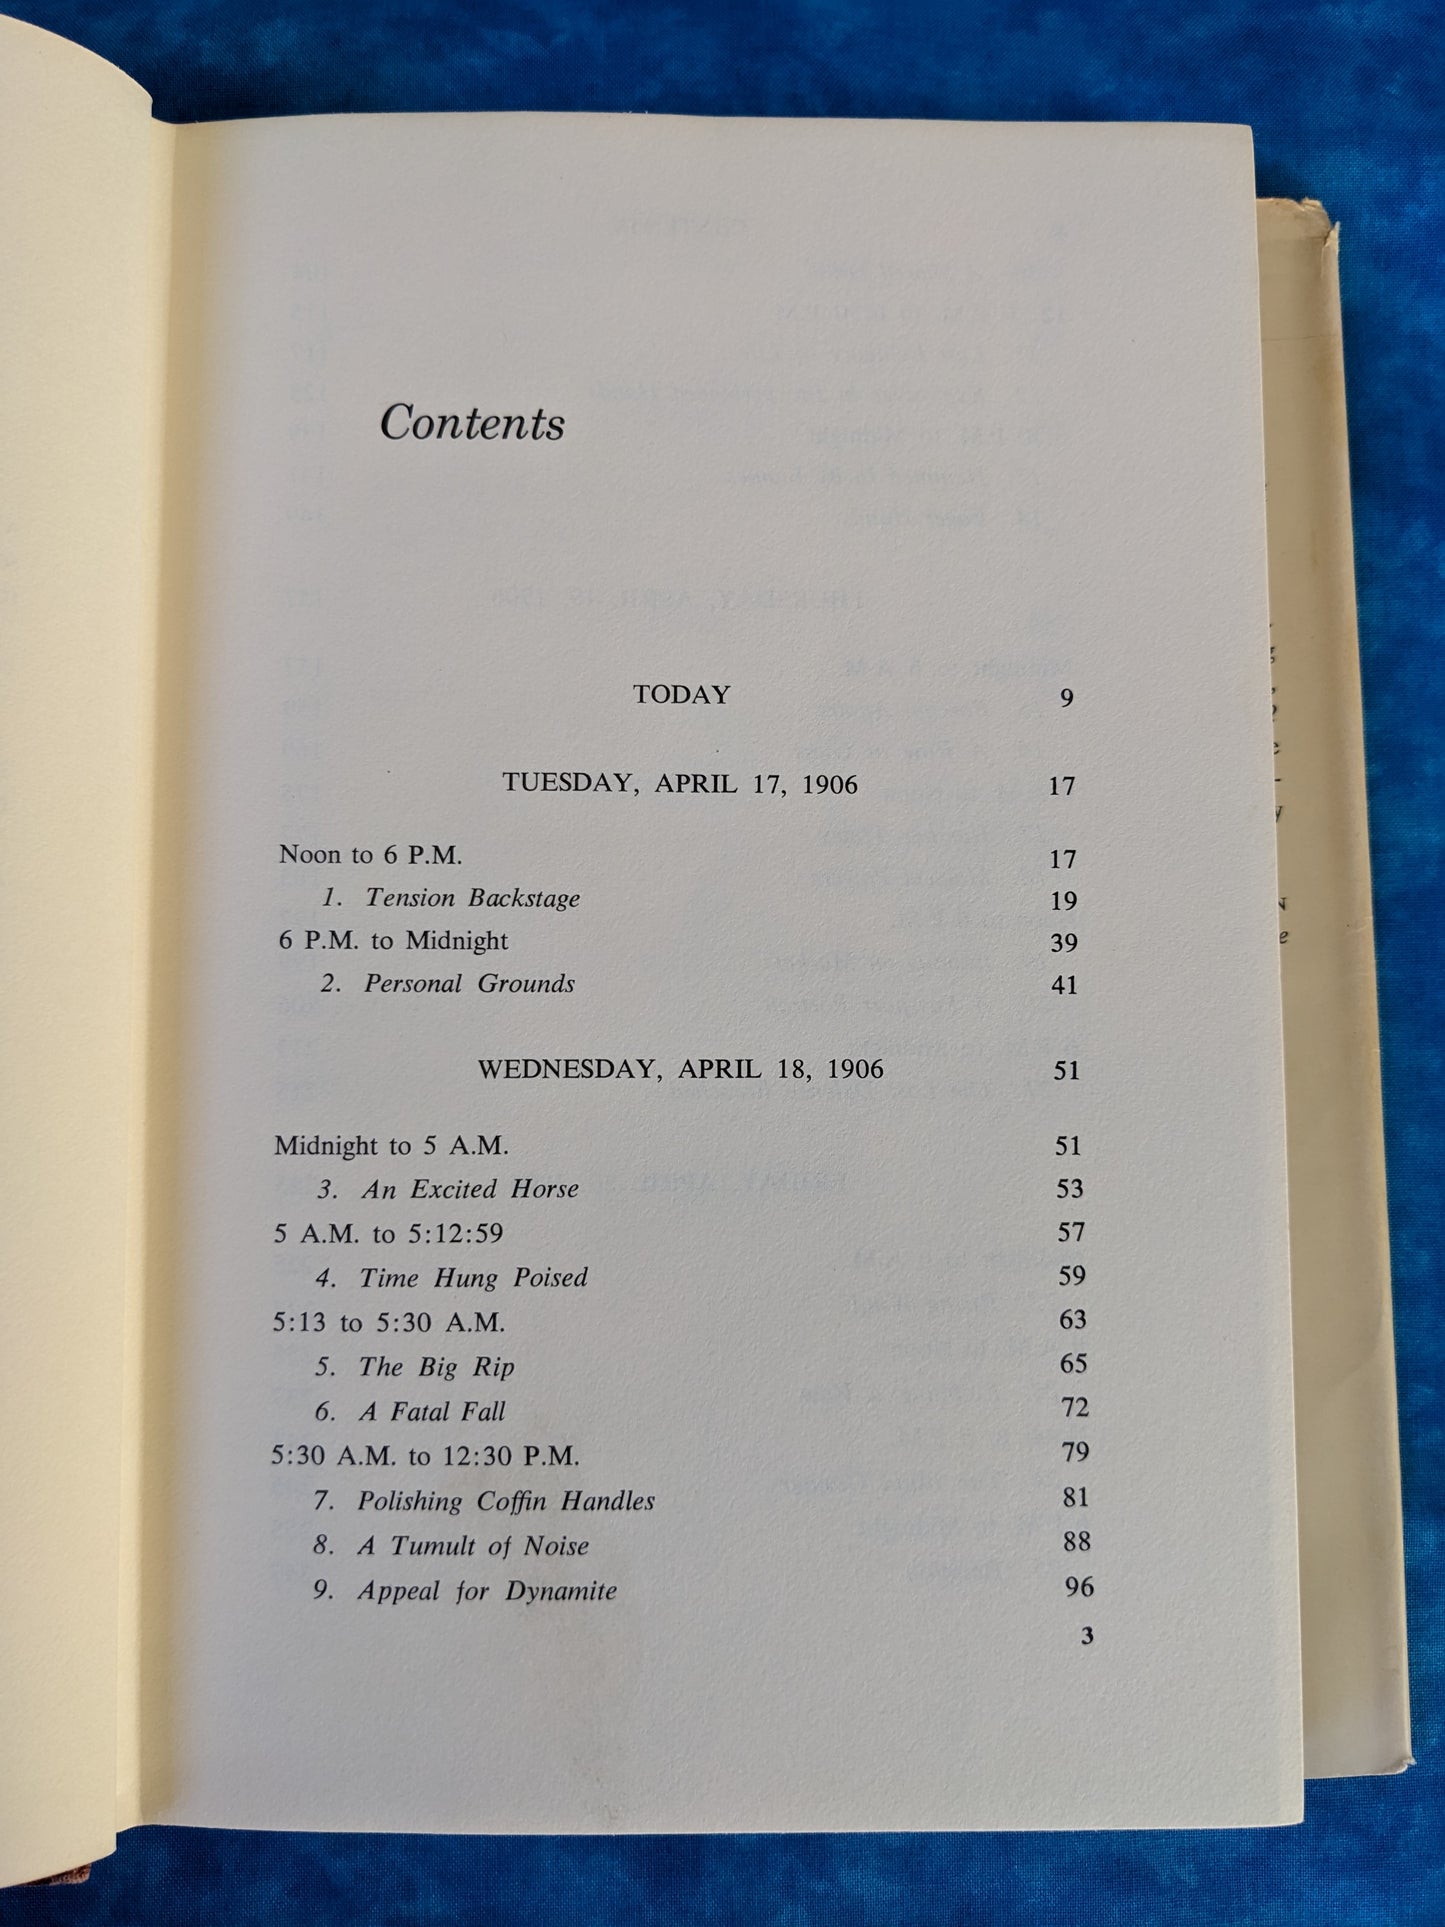 The San Francisco Earthquake vintage book contents page